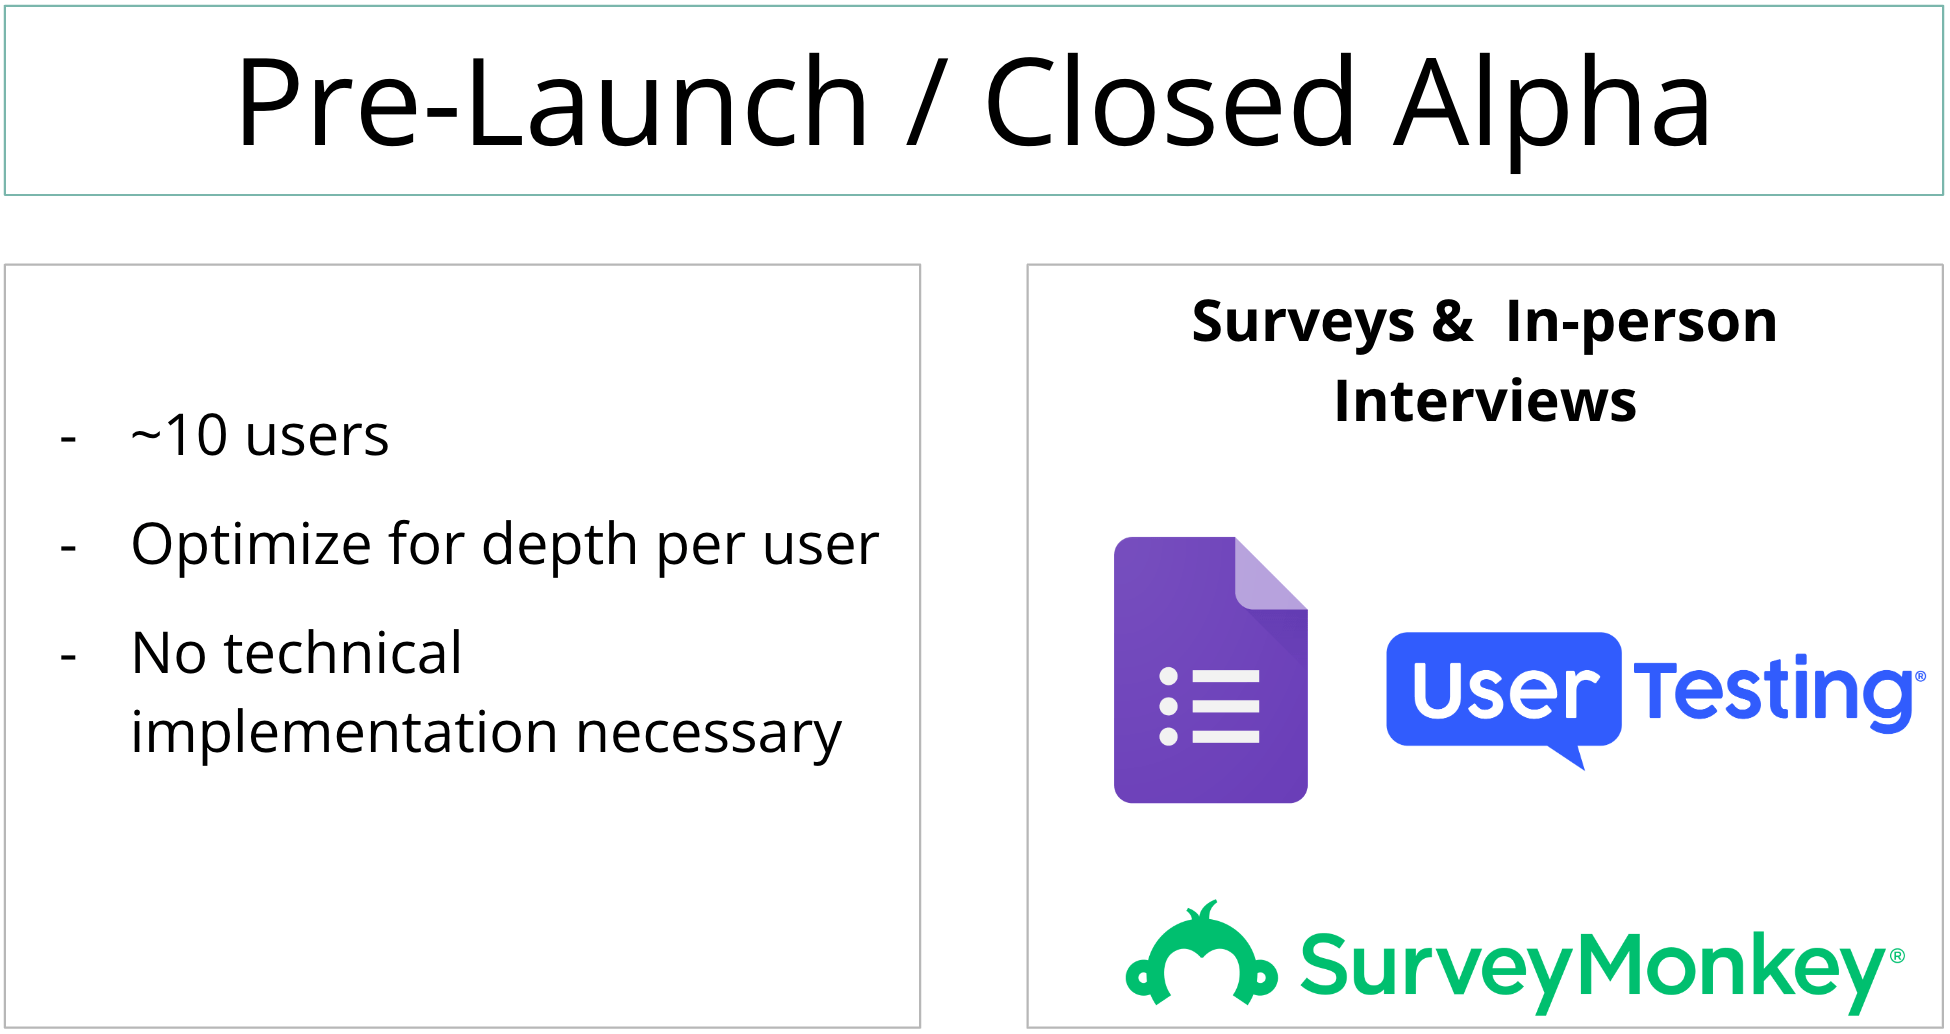 Slide about Pre-launch/Closed Alpha stage